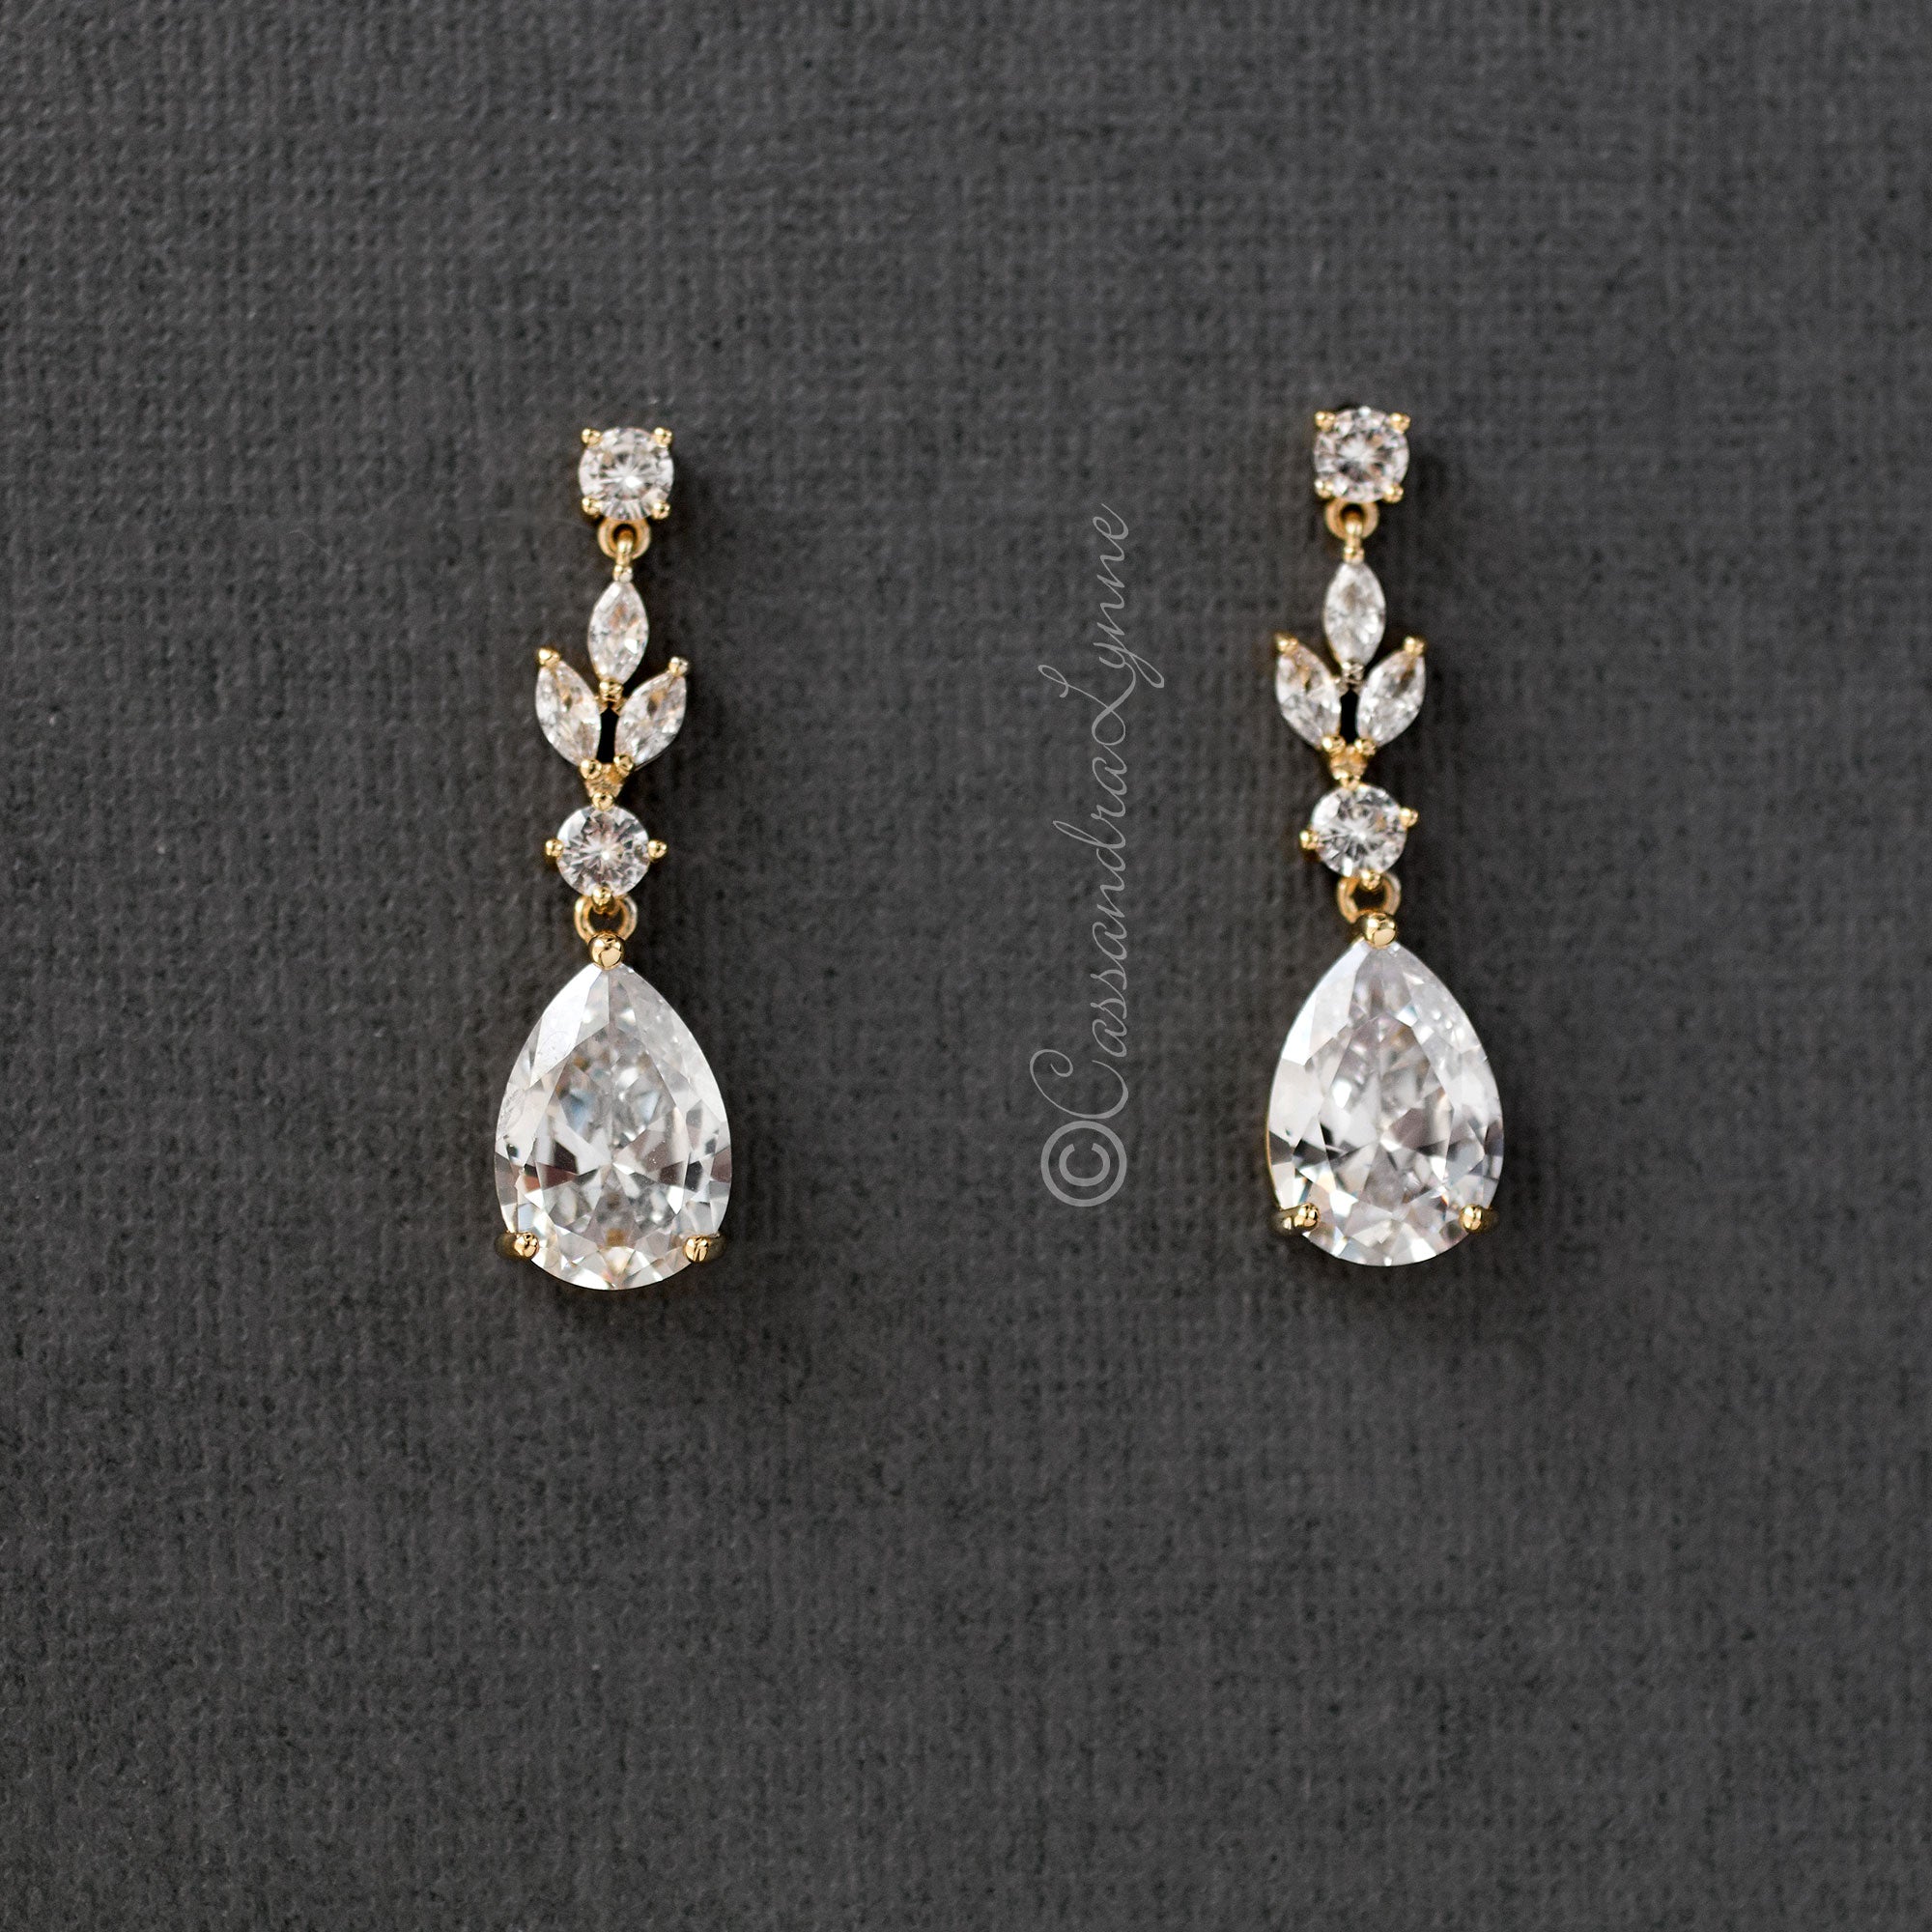 Shop Lovely Bridal Earrings in Rose Gold and Pearl Drops| Adorn A Bride -  Wholesale